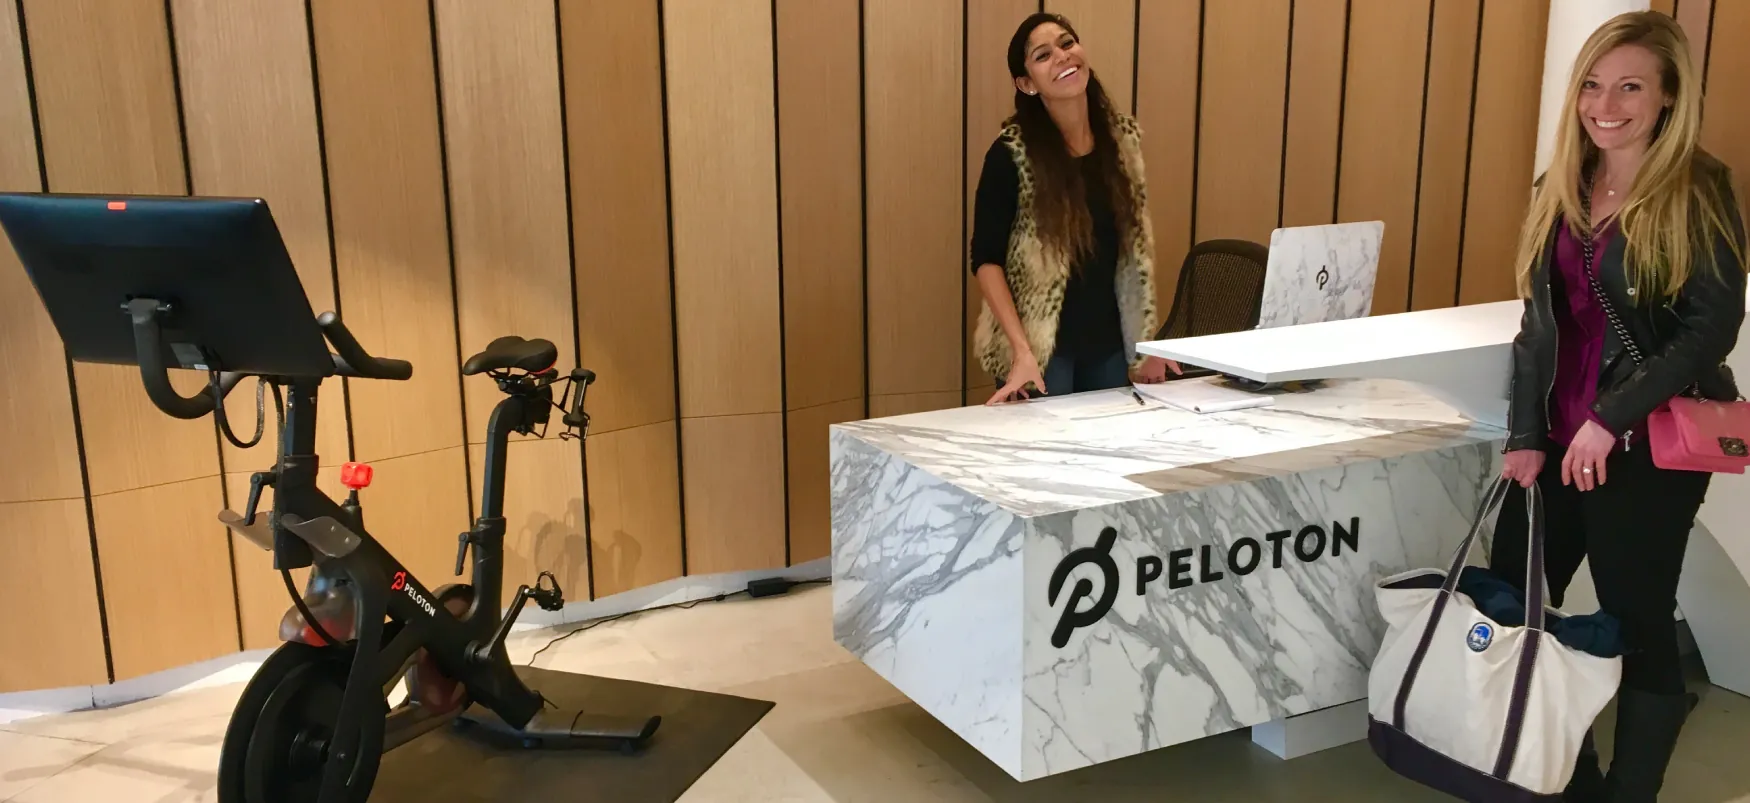 One person stands behind a marble desk with the Peloton logo on it, while another person stands in front of the desk holding a tote bag. A Peloton bike is to the right of the desk.